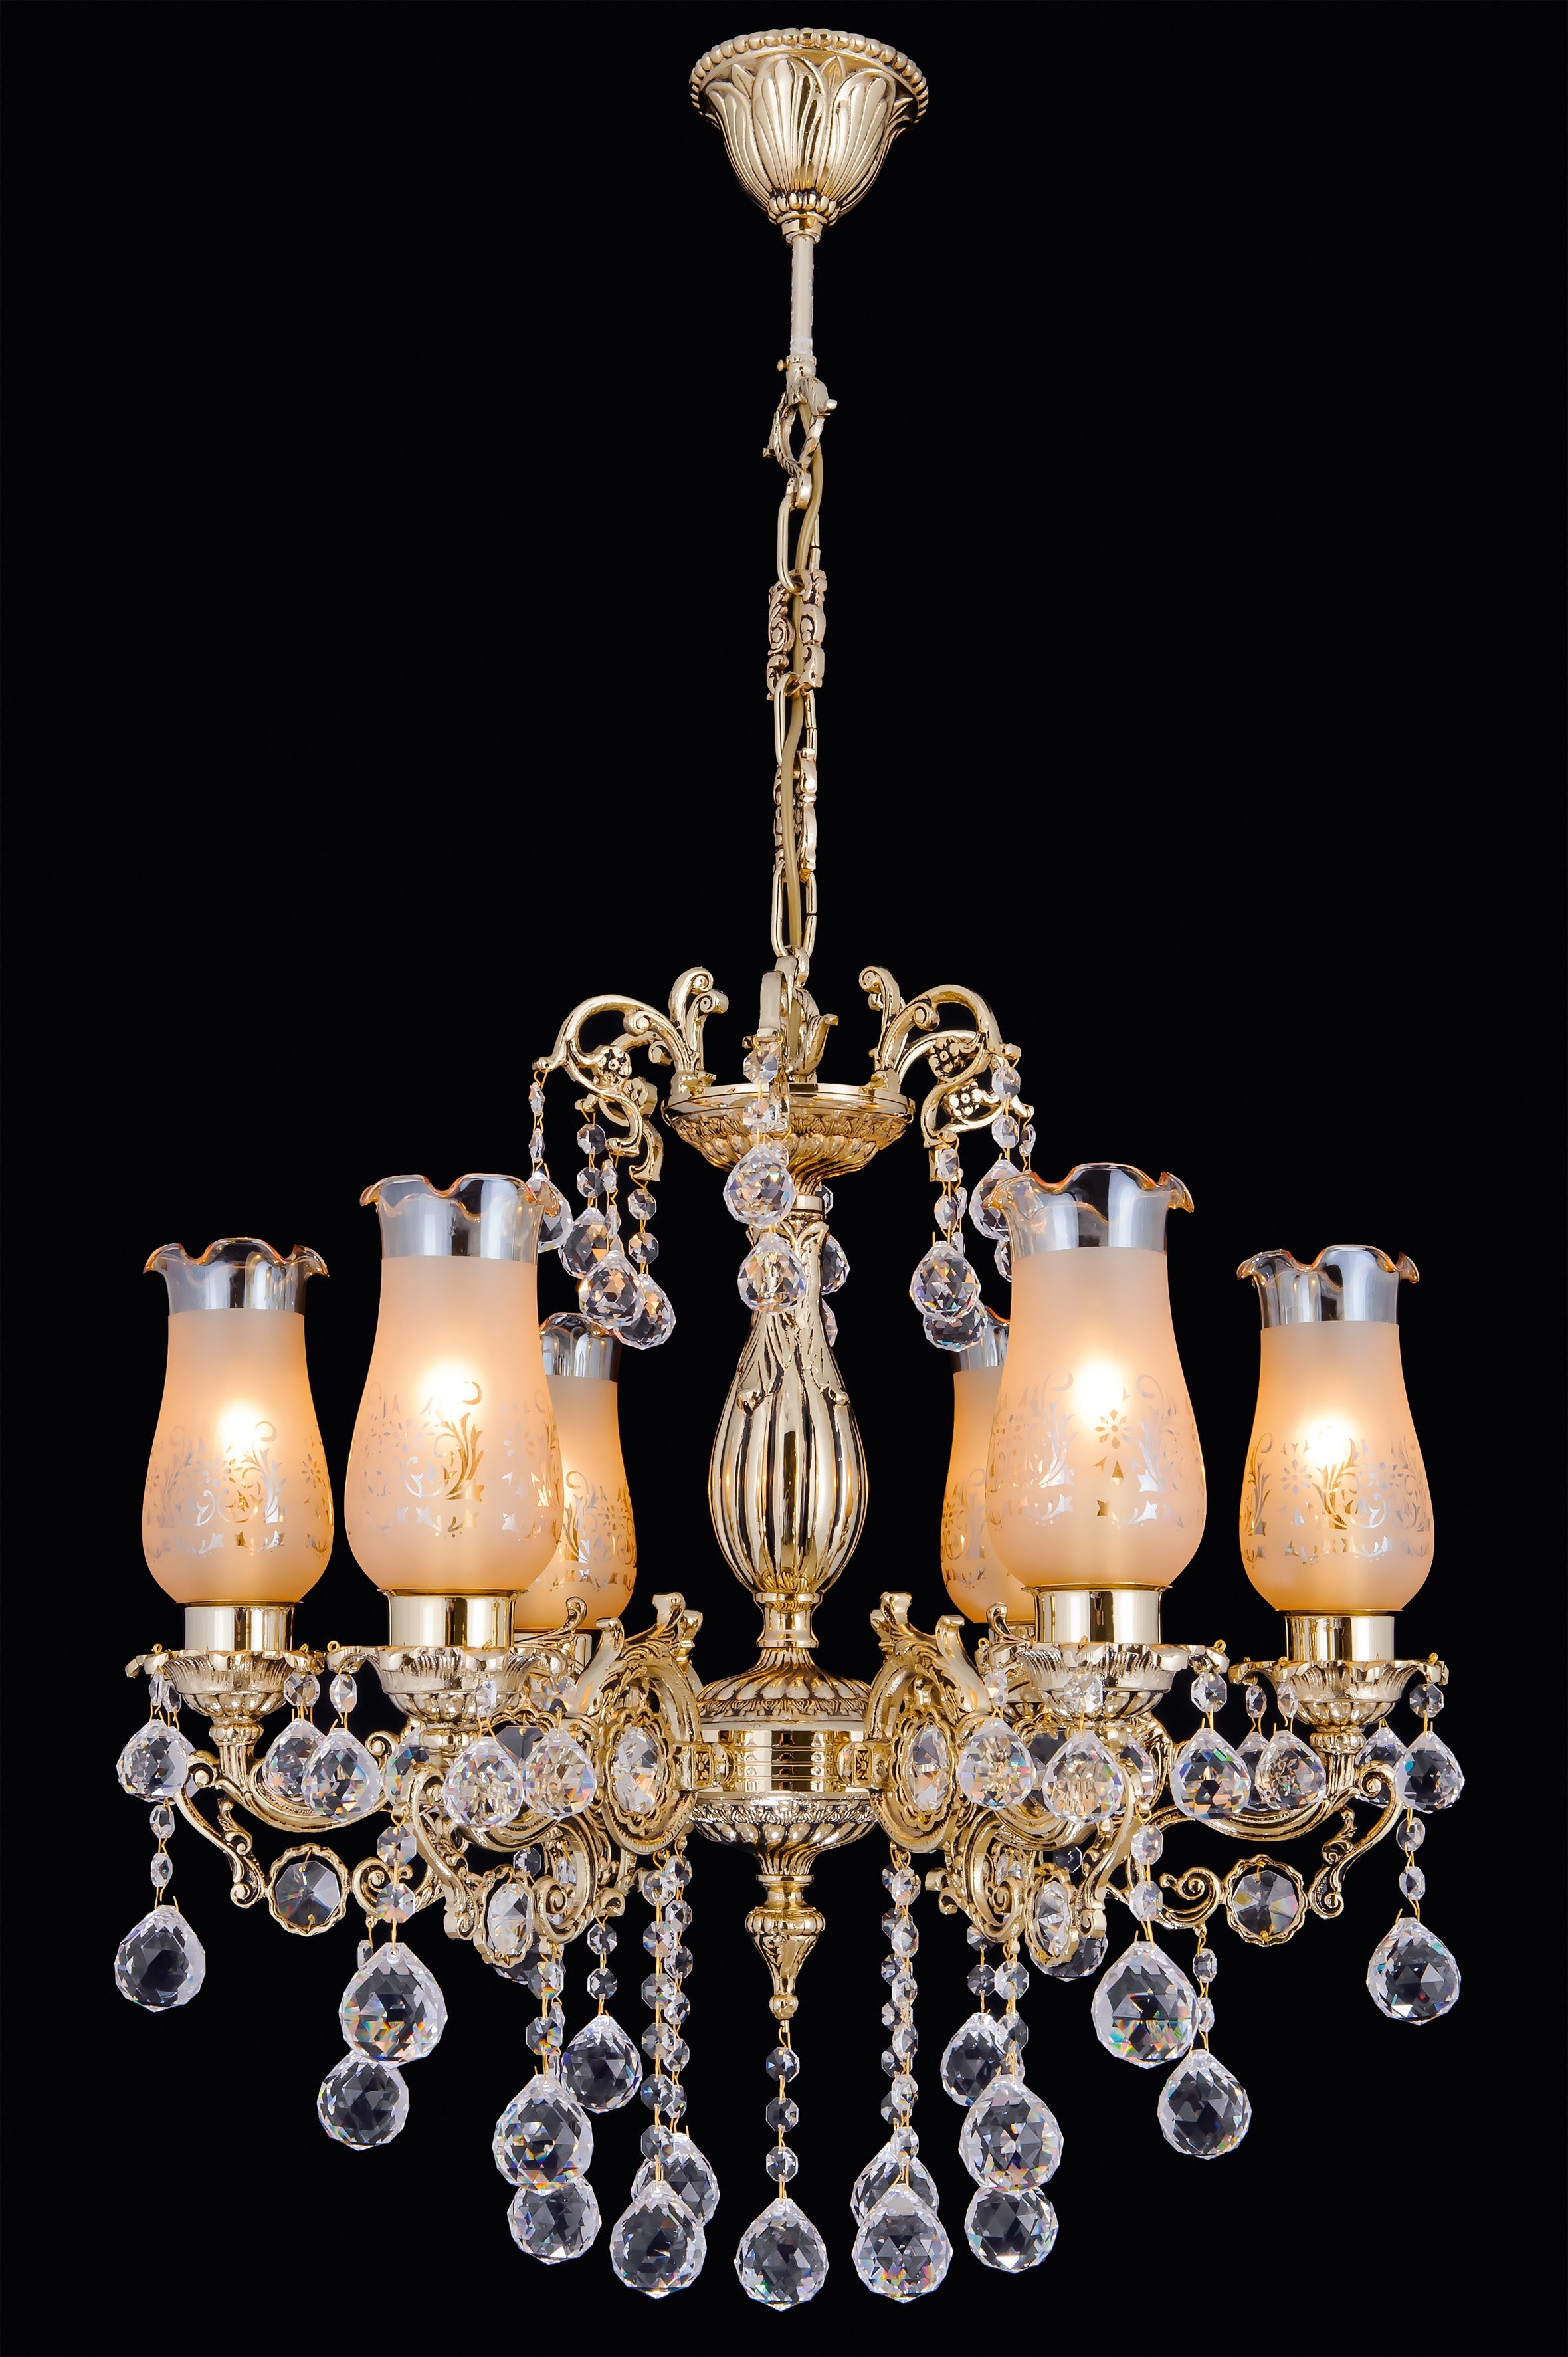 Aix-en-Provence Radiance 6-Light Asfour Crystal Chandelier in Gold Finish